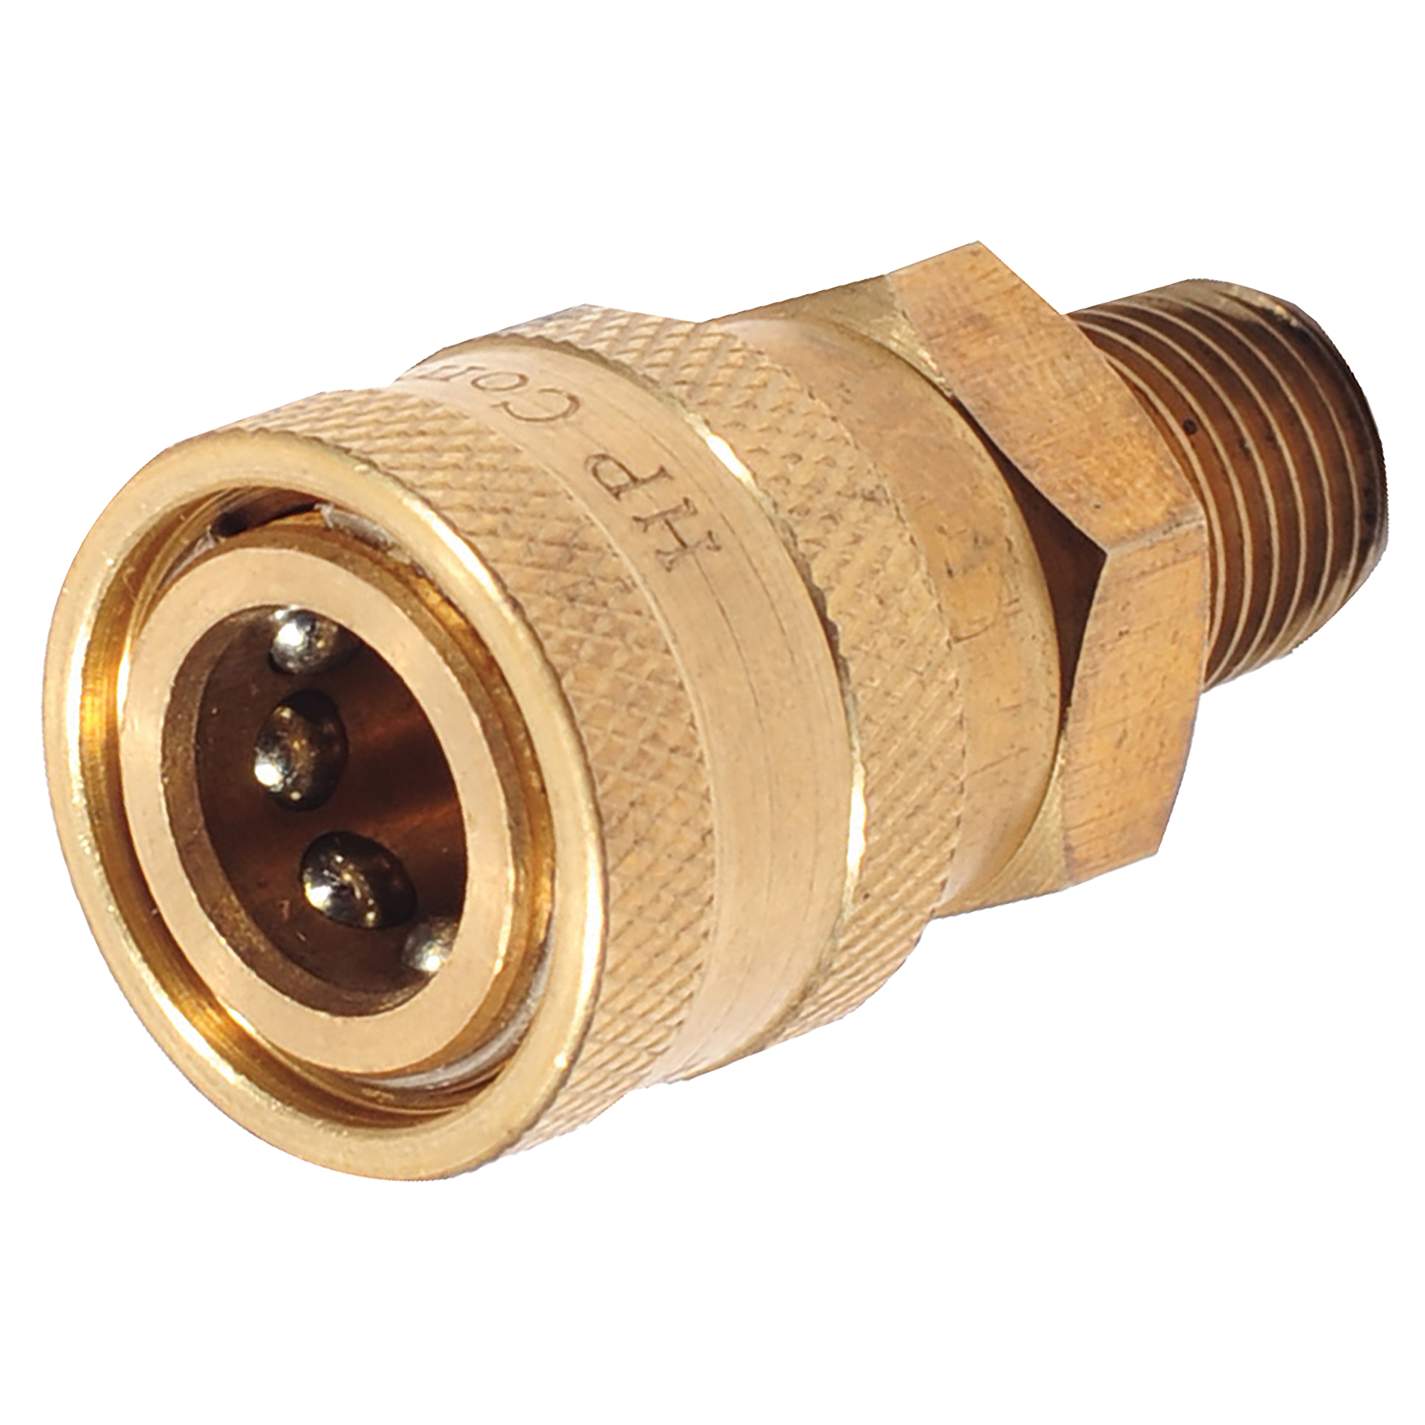 1/4" BSPP MALE QUICK RELEASE COUPLING